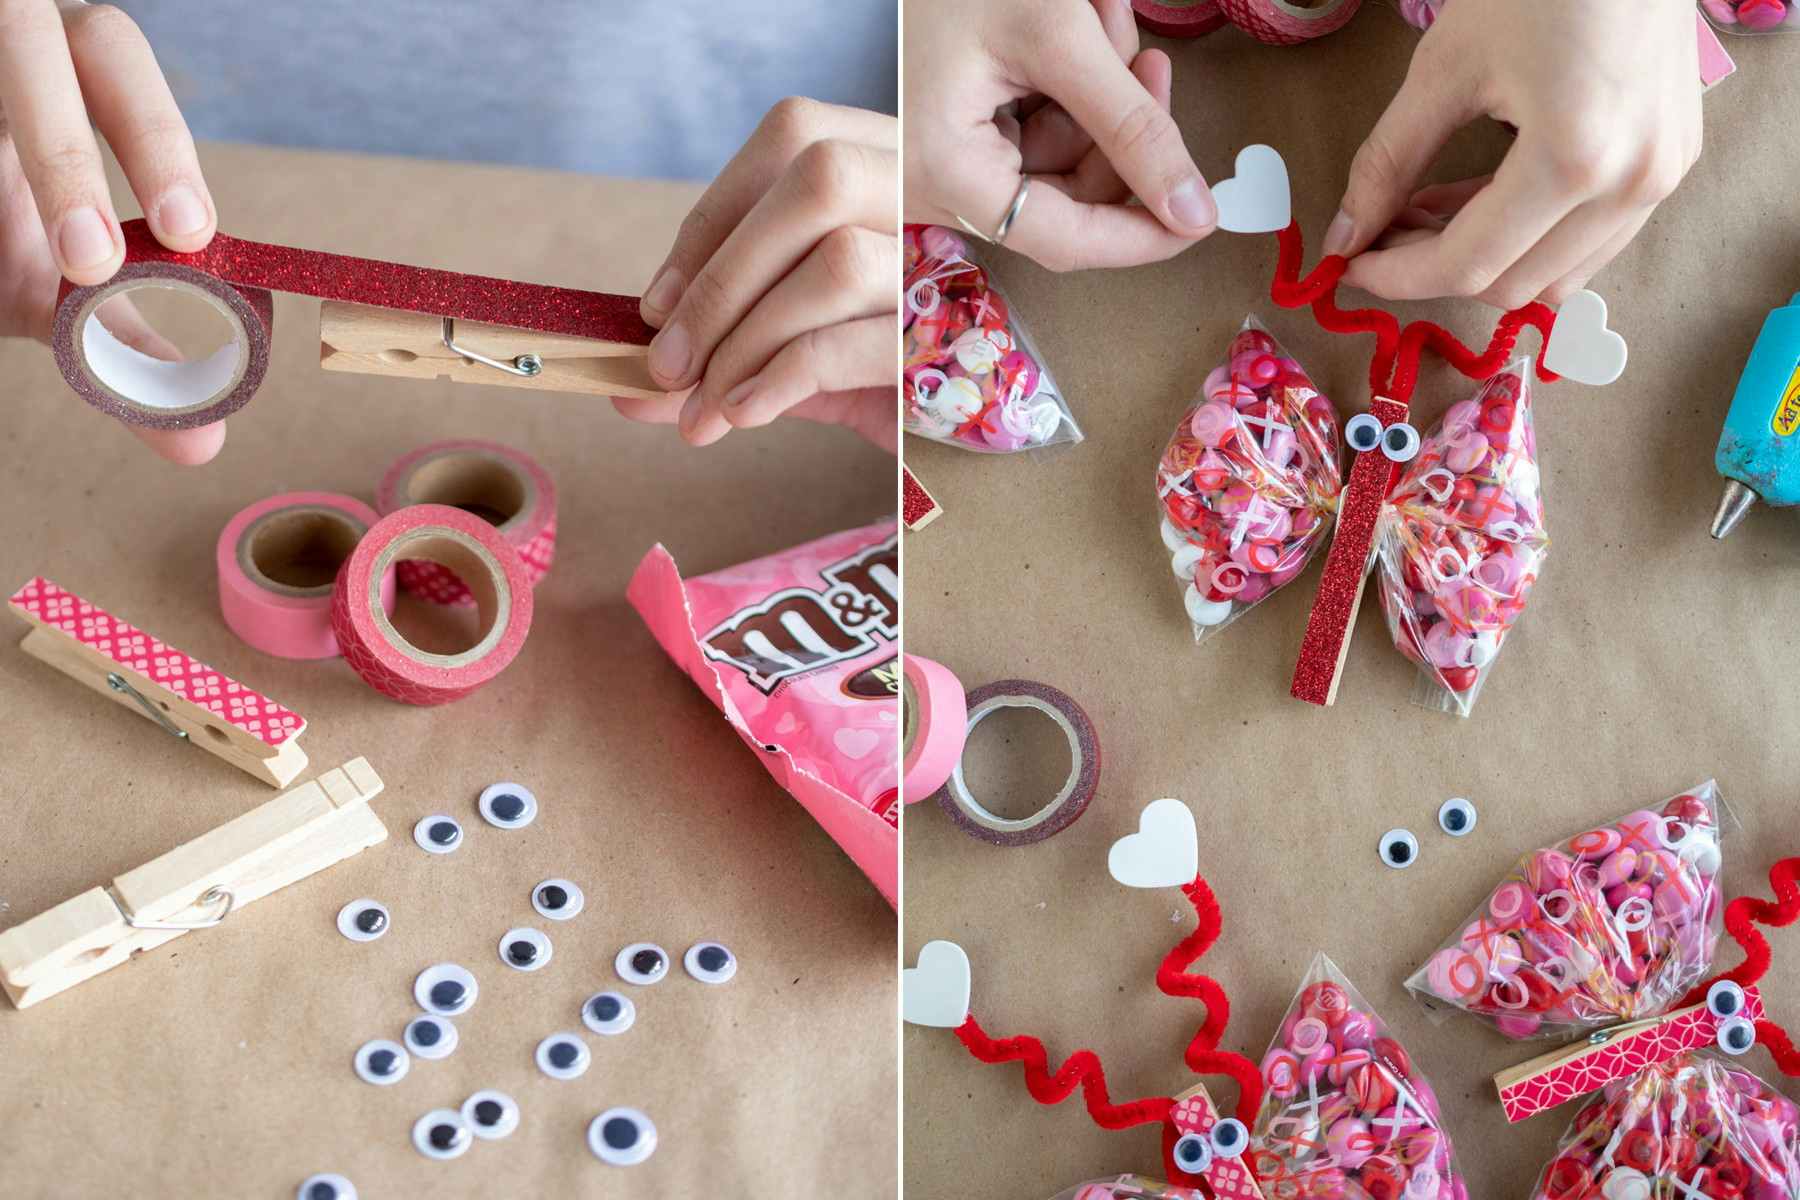 someone putting washy tape on a clothespin and attaching heart shapes to the clothespins turned into butterfly